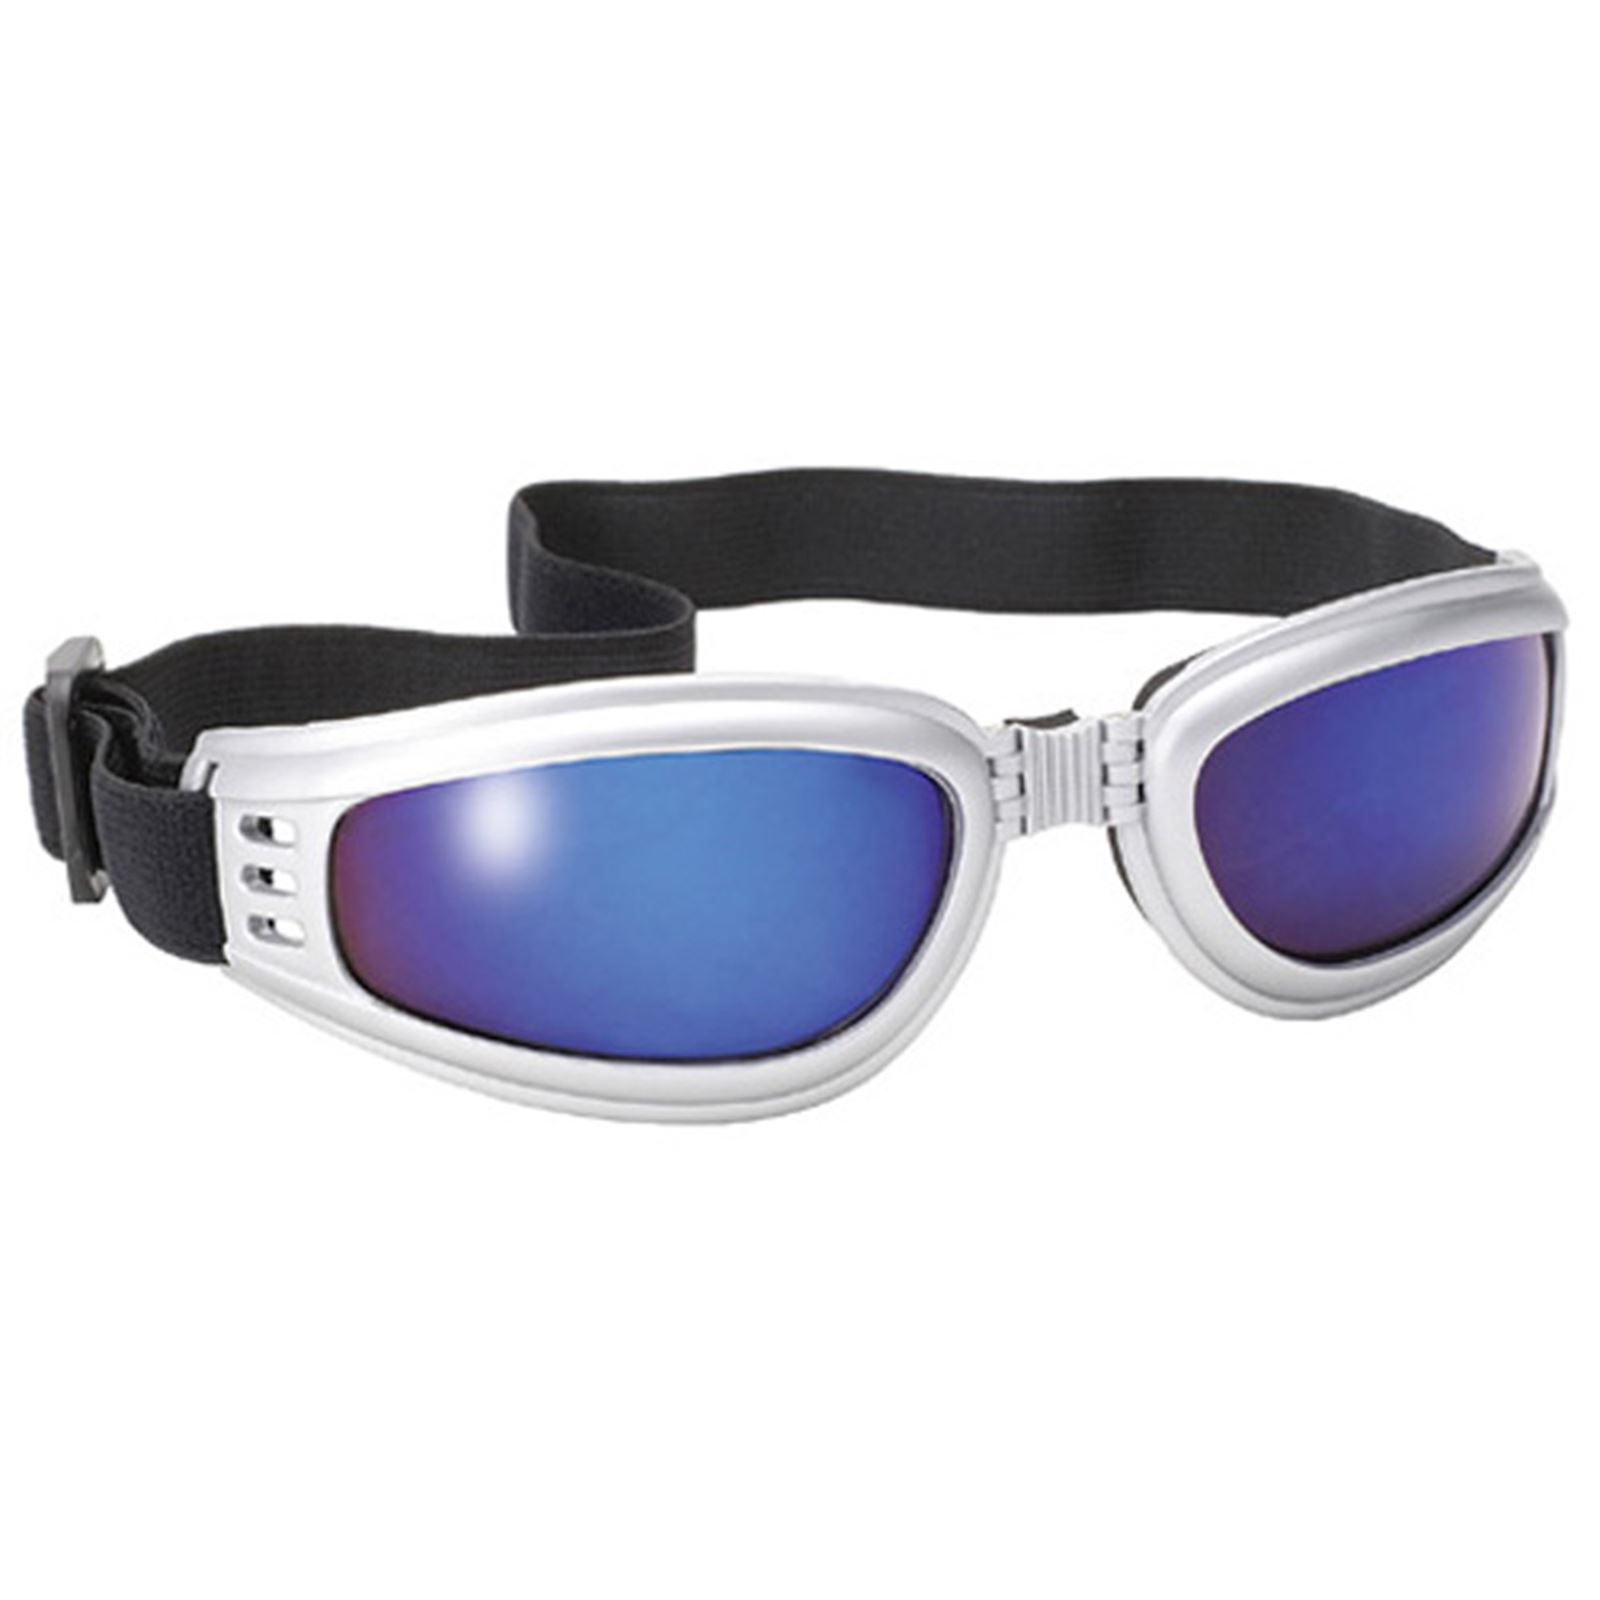 Pacific Sunglasses Day 2 Night Freedom Goggles/Sunglasses - Motorcycle, ATV / & Powersports Parts The Best Powersports, Motorcycle, ATV Snow Gear, Accessories and More